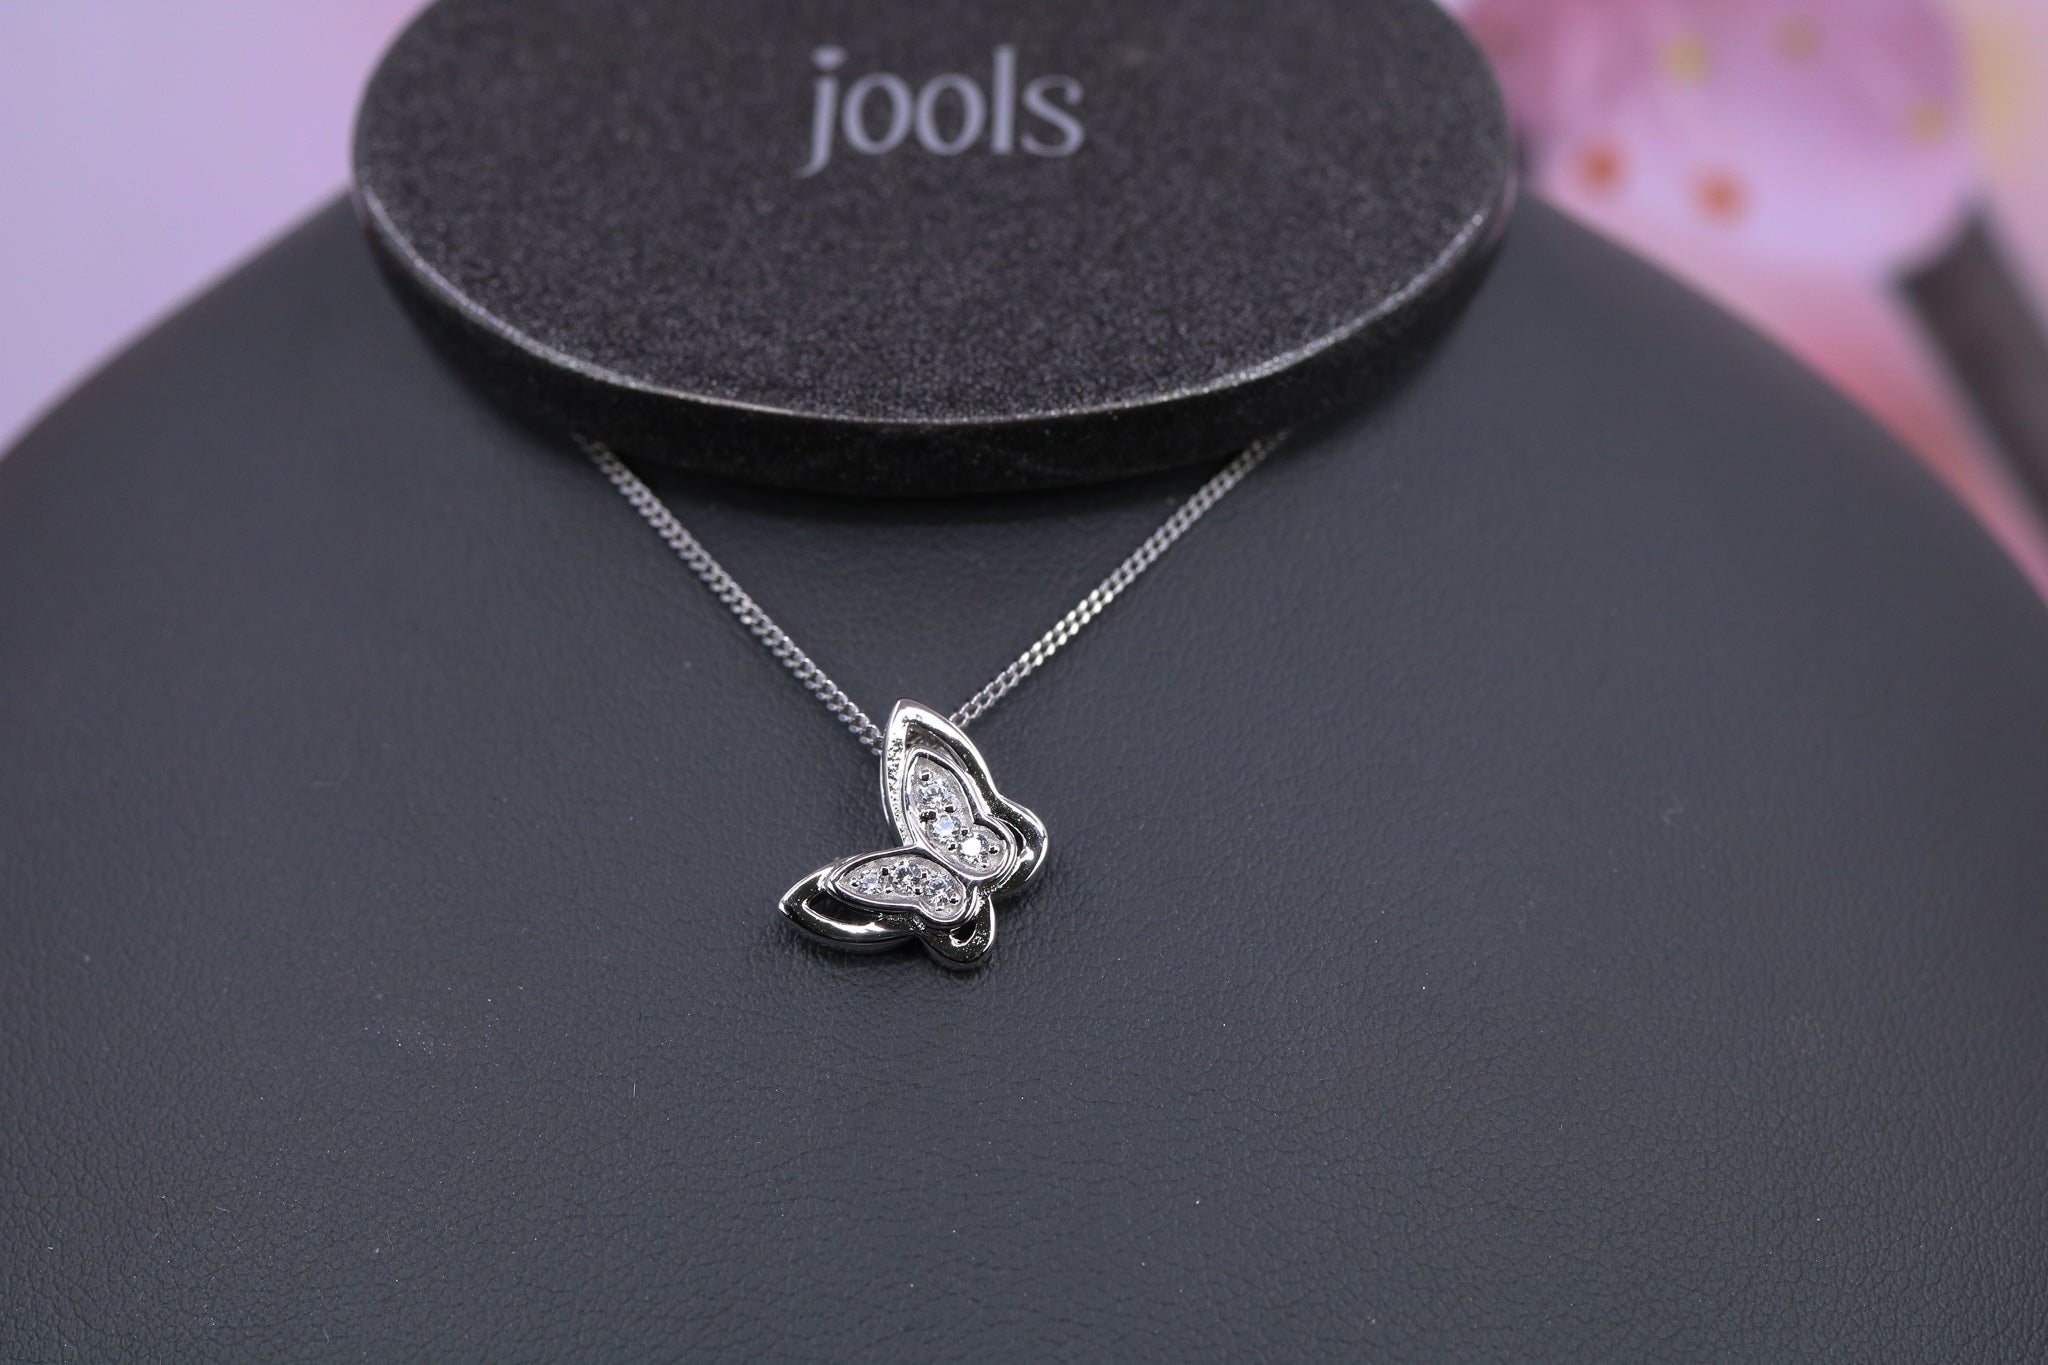 Jools Sterling Silver Pendant & Chain - JL1006 - Hallmark Jewellers Formby & The Jewellers Bench Widnes